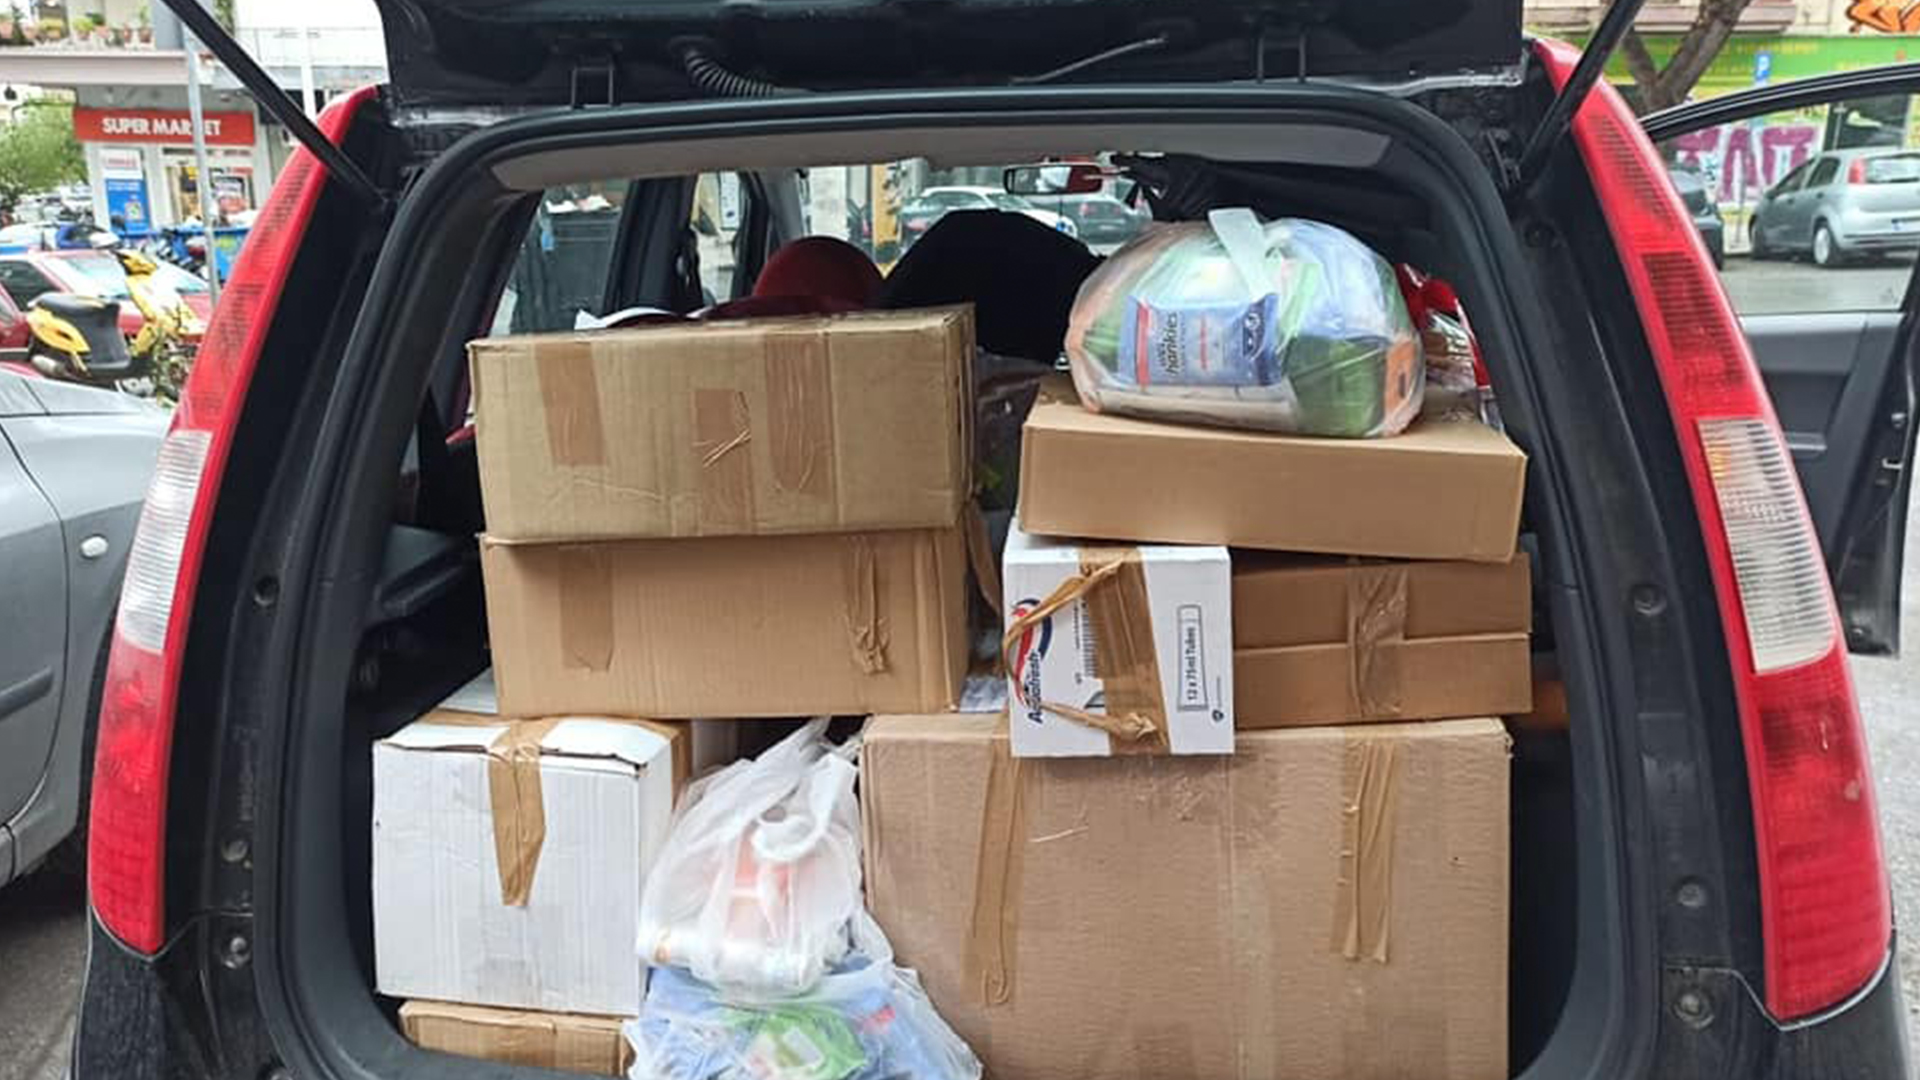 Car packed with supplies for women detainees at Petrou Ralli